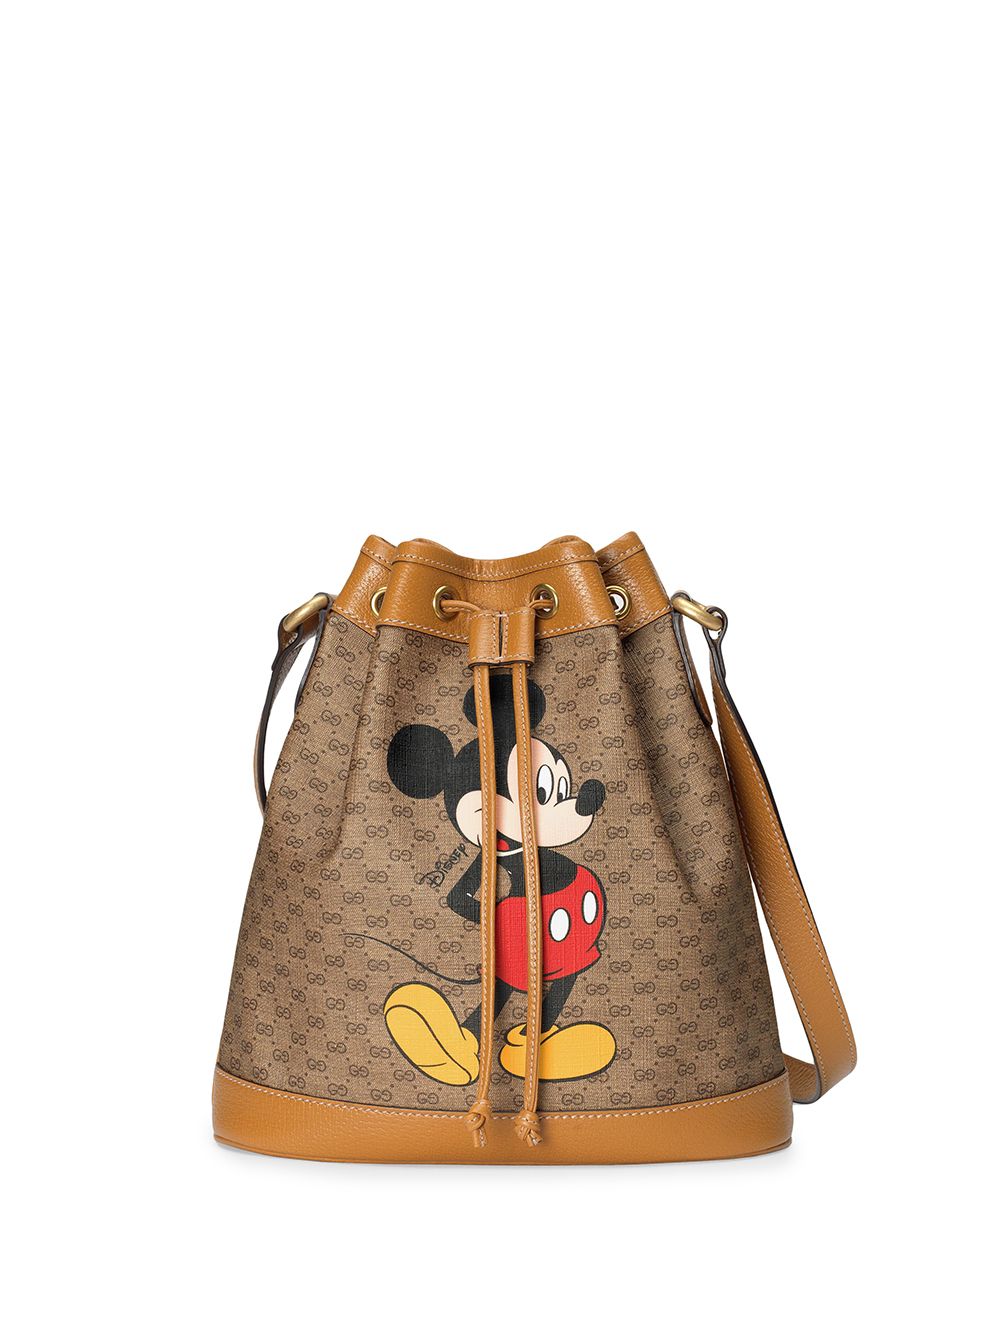 GUCCI DISNEY MICKEY MOUSE BAG -BRAND NEW, AUTHENTIC, LIMITED